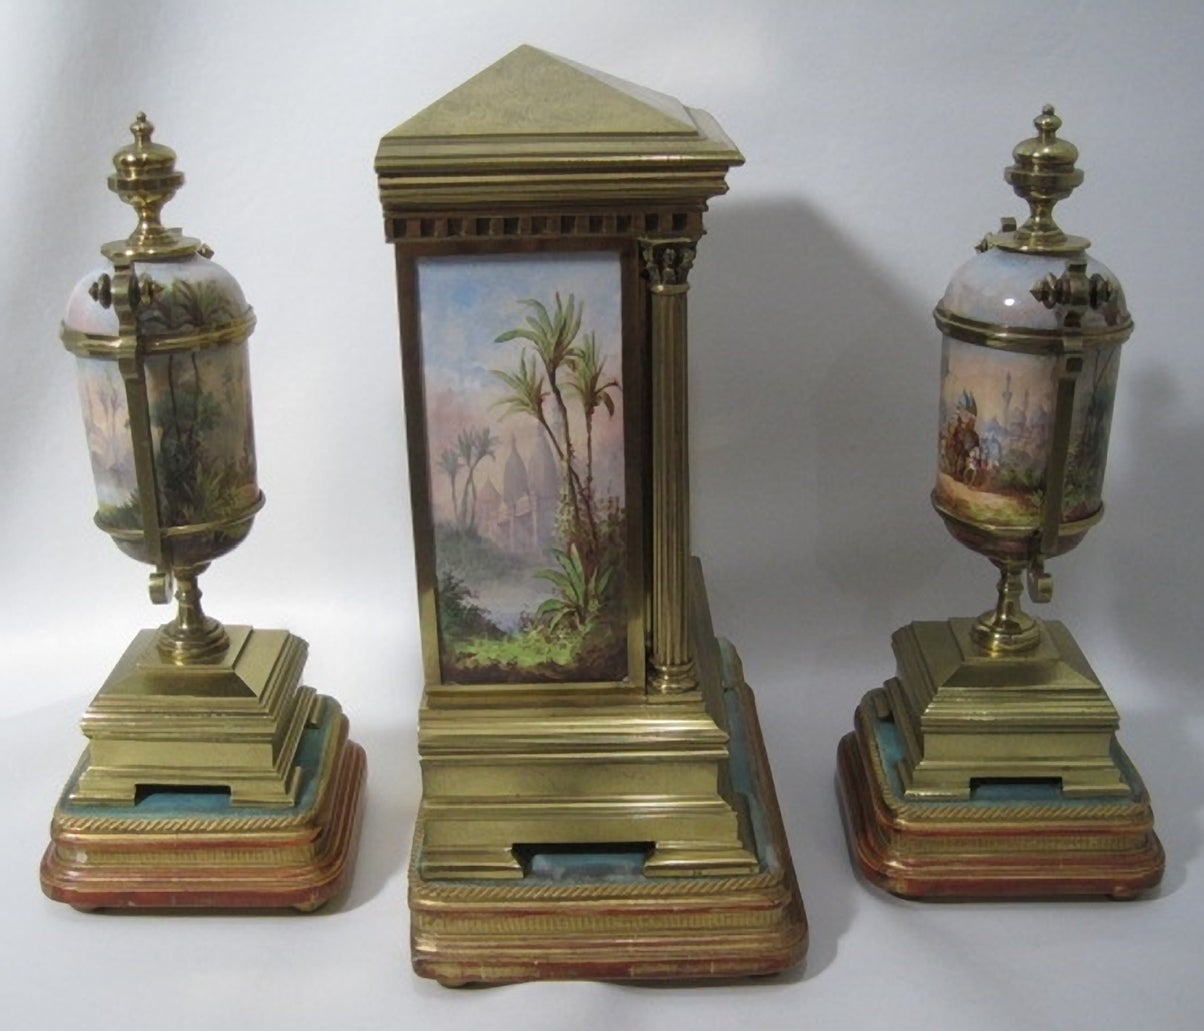 19th Century French Gilt Bronze and Porcelain Mantel Clock and Garniture For Sale 2